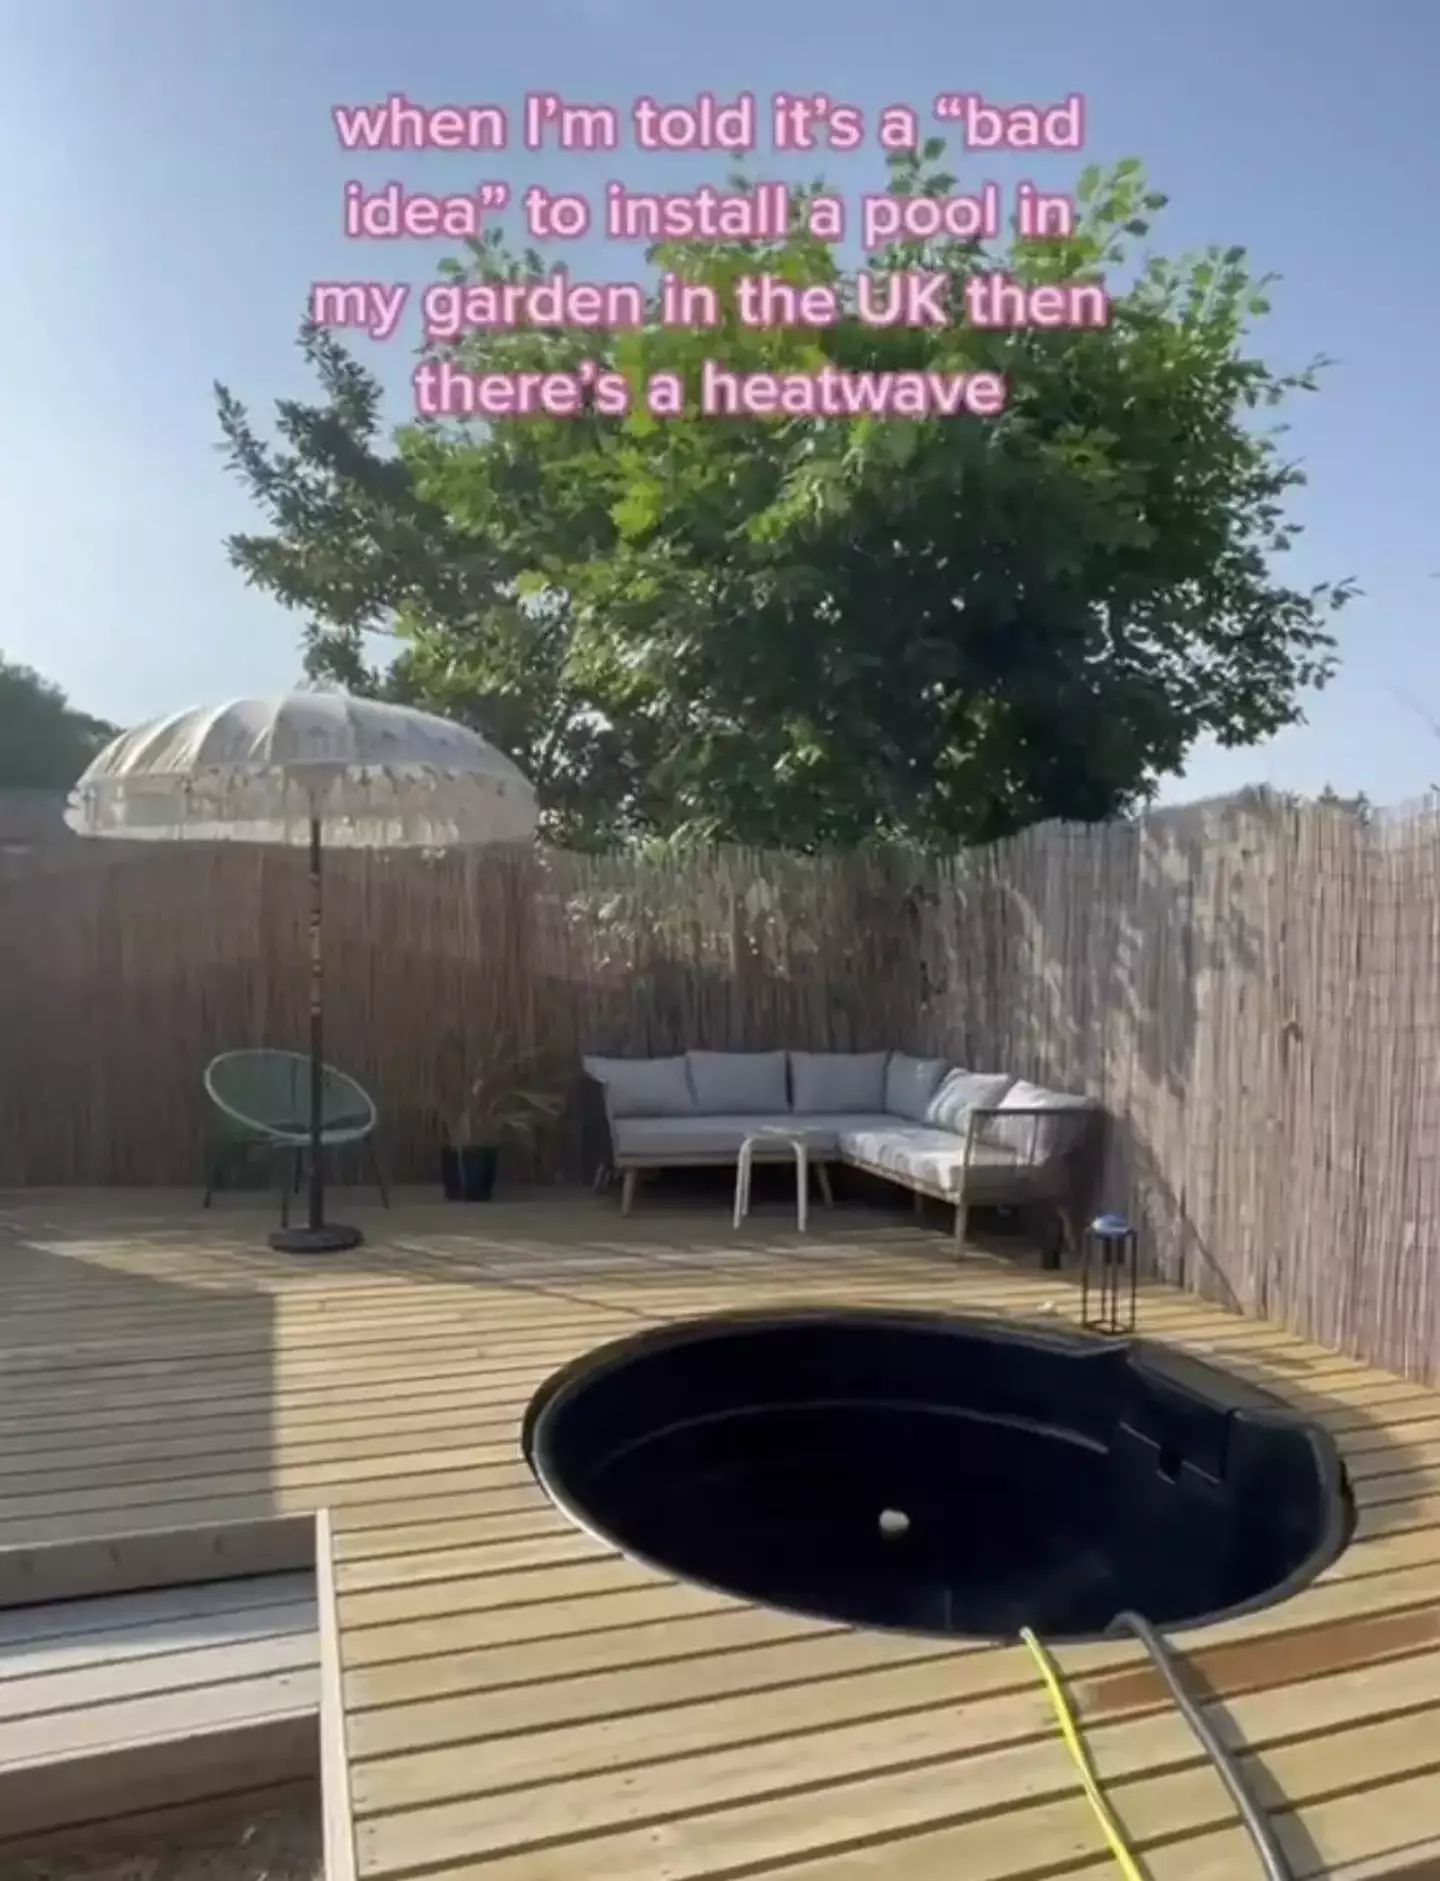 The woman said she had 'zero regrets' about building the £300 pool.